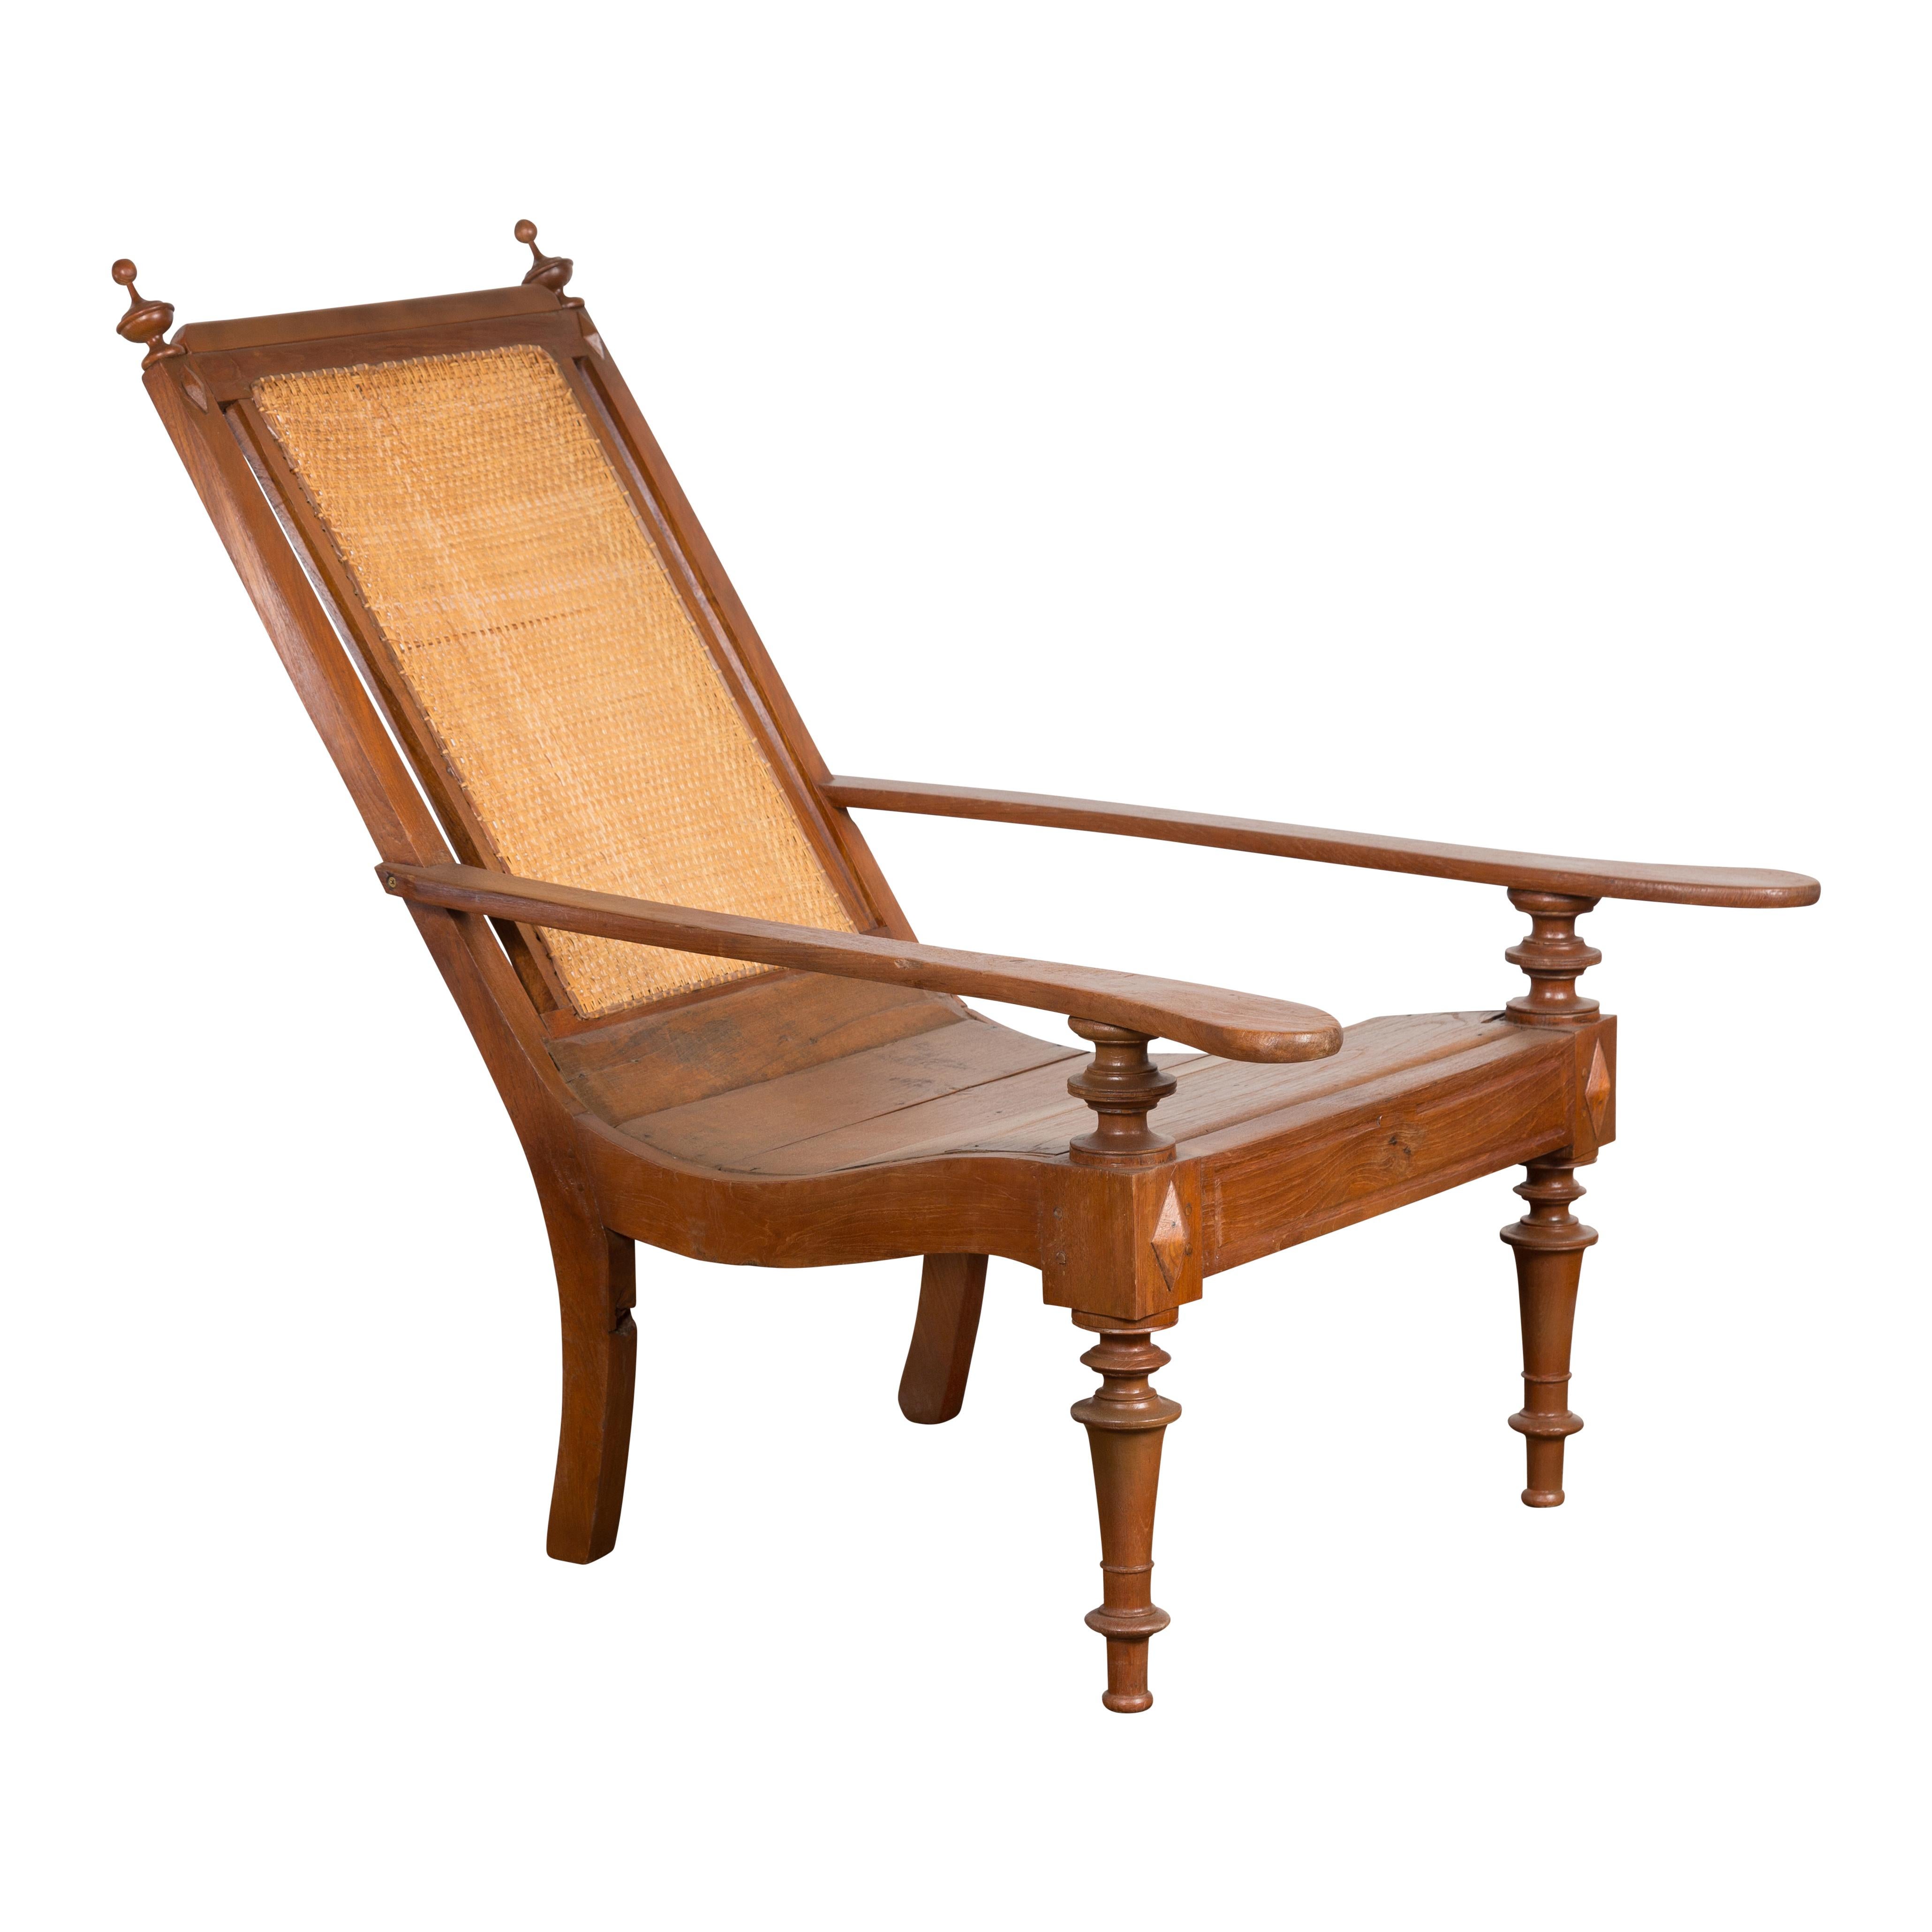 Dutch Colonial Wood and Rattan Lounge Chair with Slanted Back and Carved Finials For Sale 8